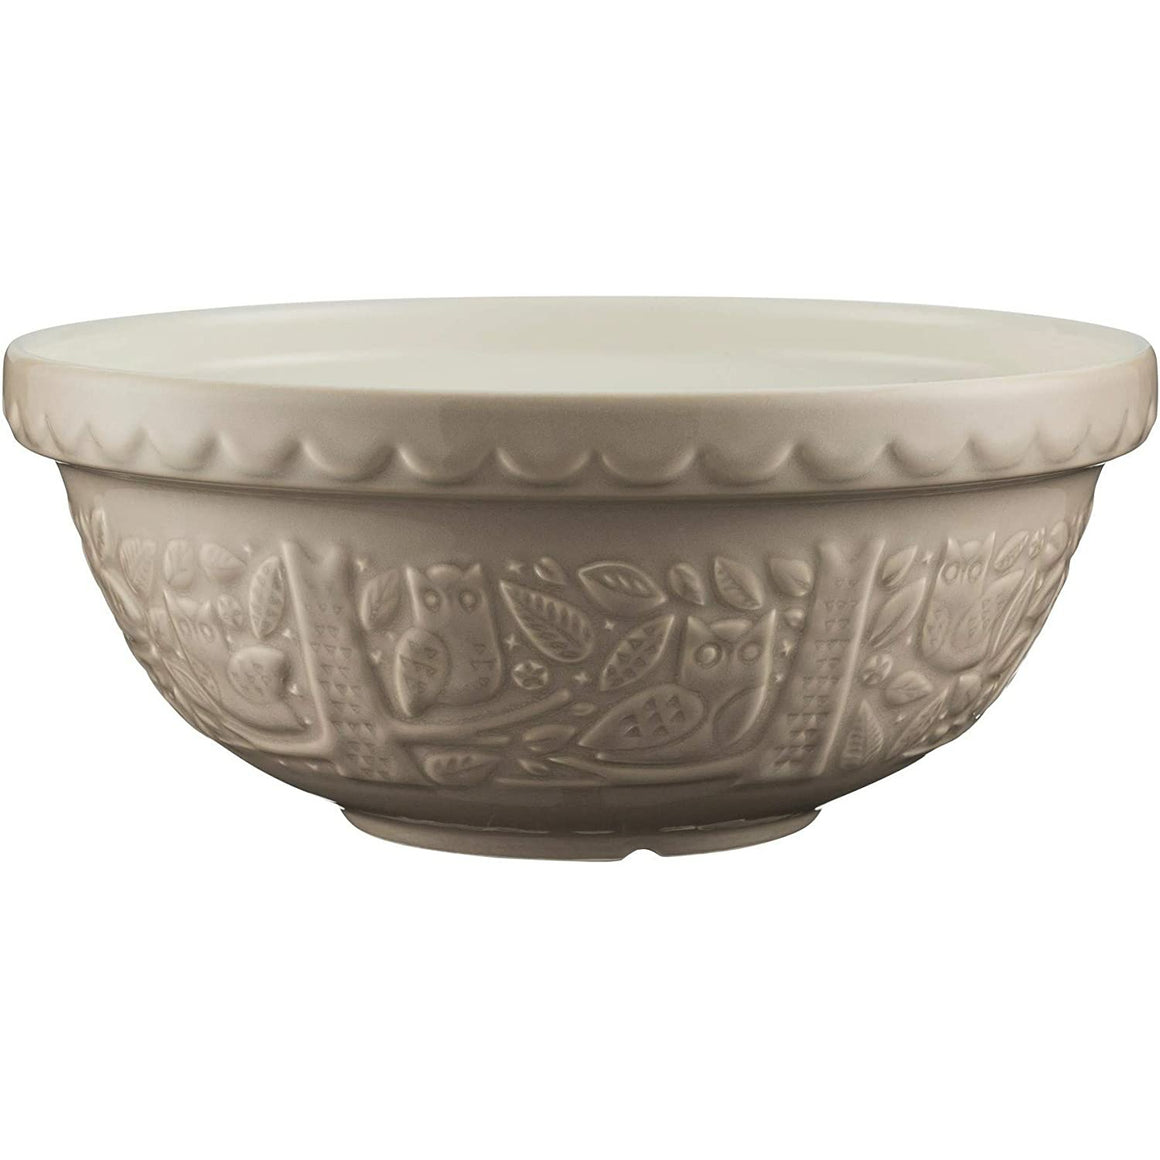 Mason Cash | In the Forest | Owl Embossed Mixing Bowl | Stone - 2.85 Quart (S18)